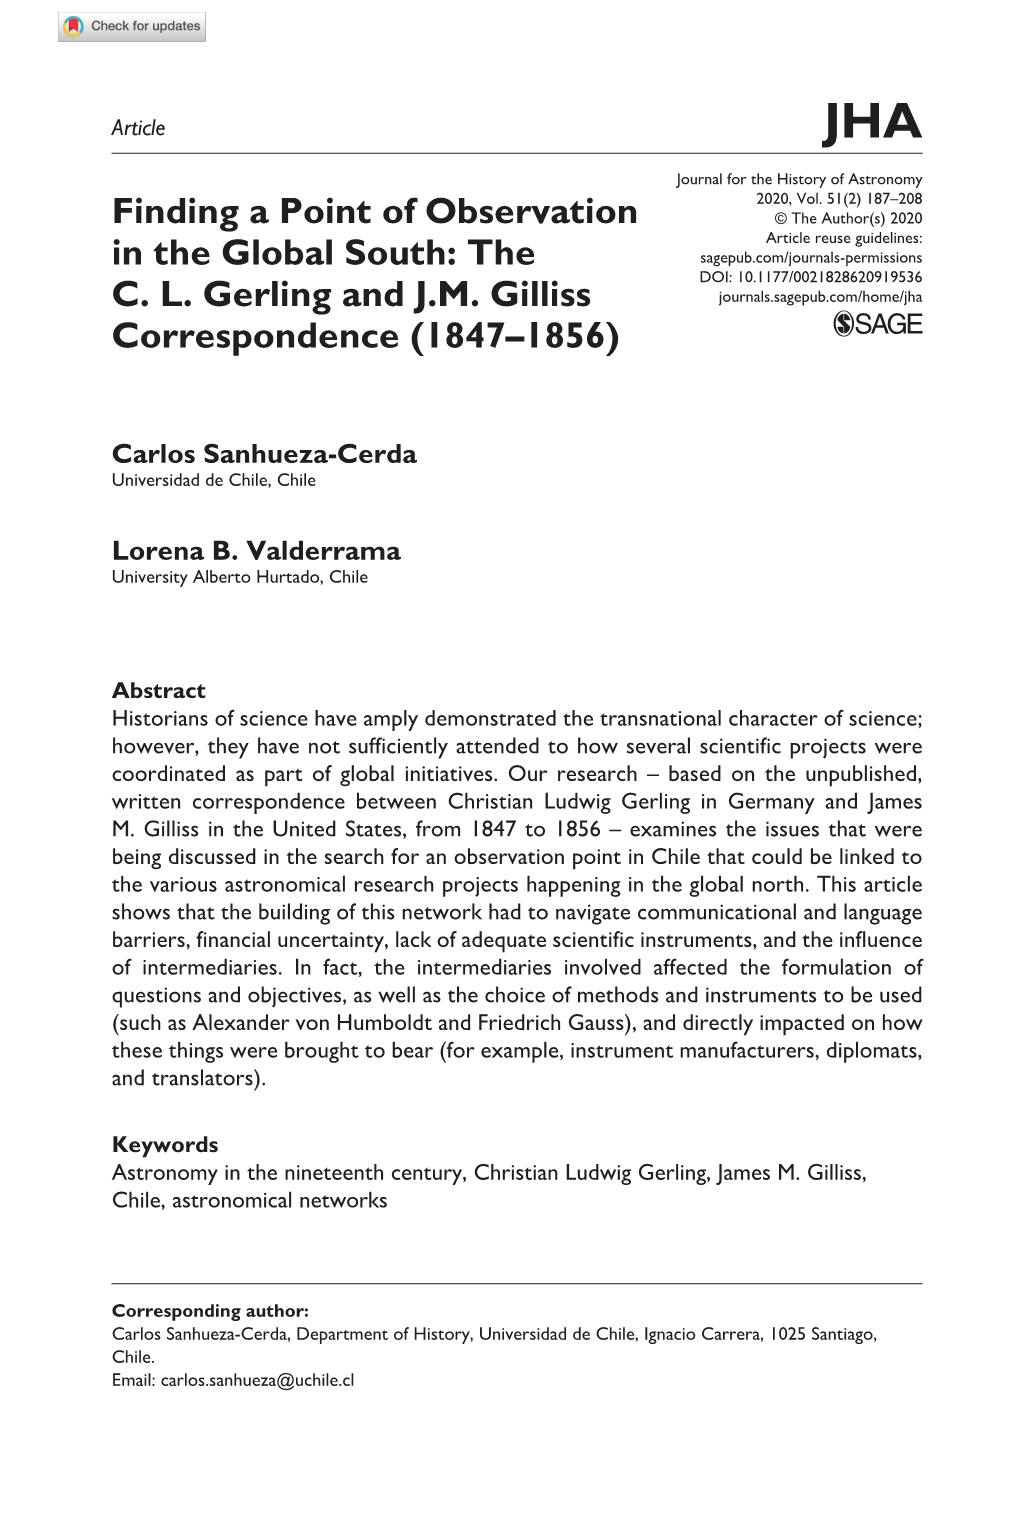 The CL Gerling and JM Gilliss Correspondence (1847–1856)